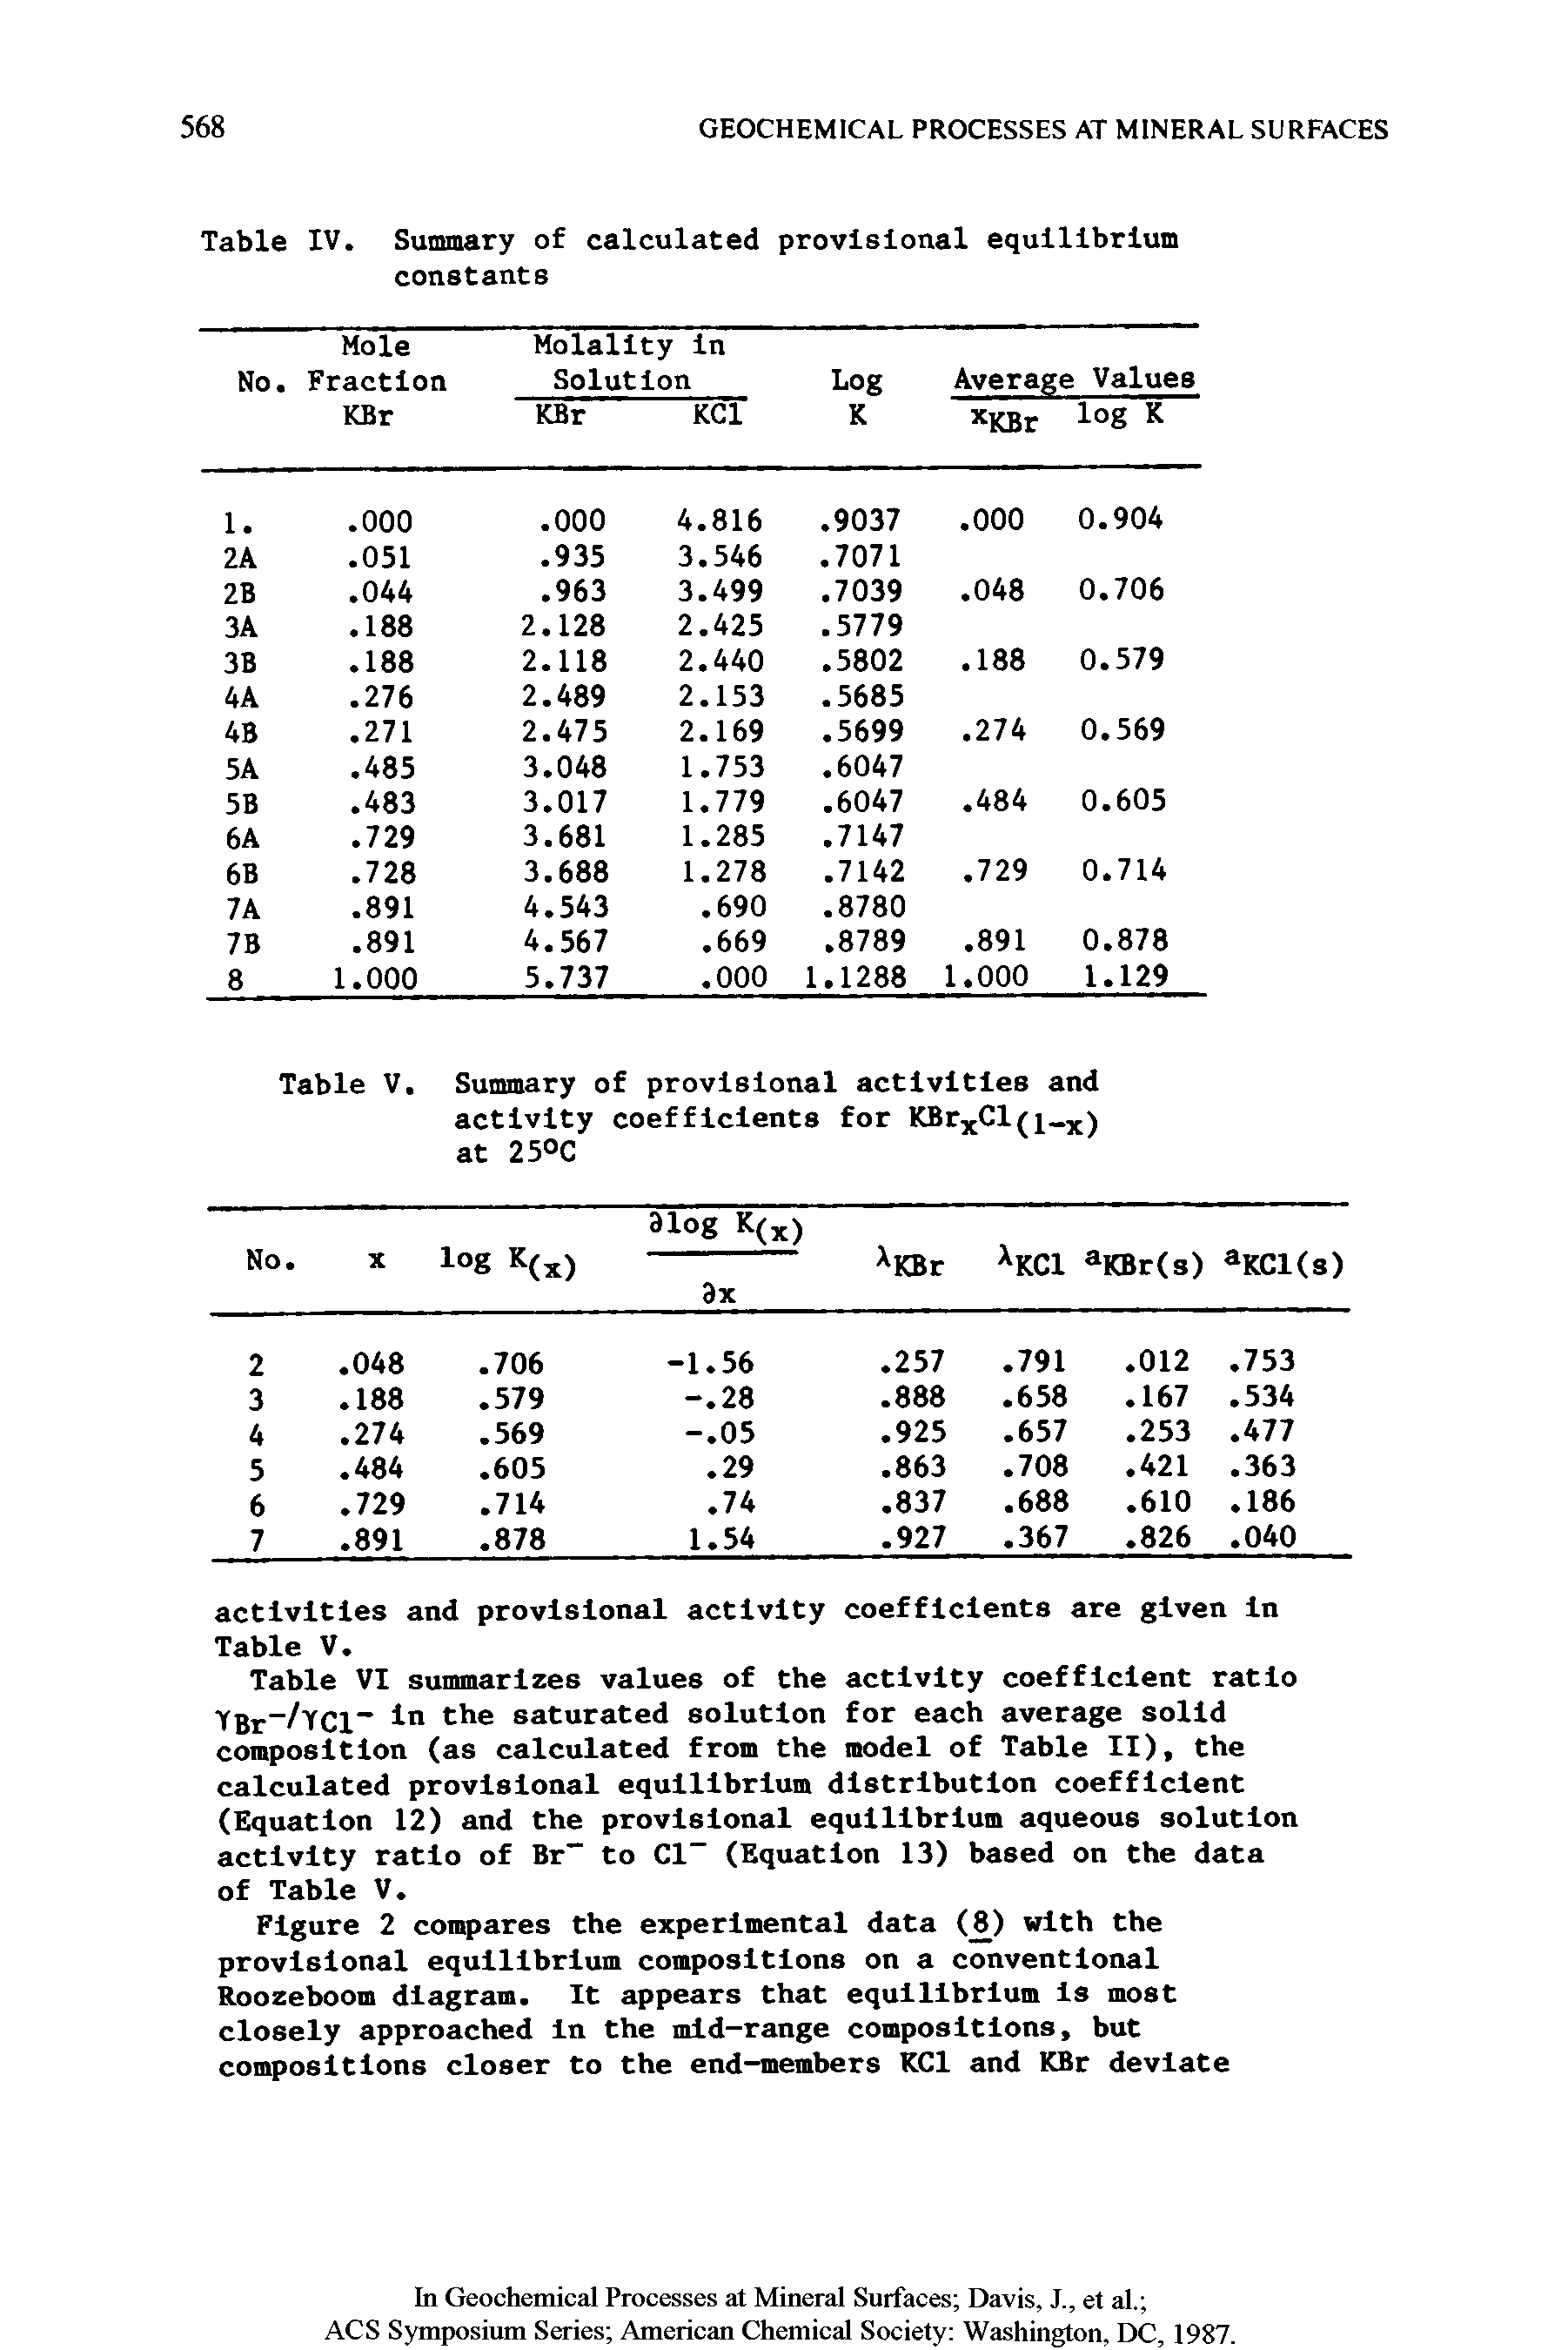 Table VI summarizes values of the activity coefficient ratio Ygr-/YC].- in the saturated solution for each average solid composition (as calculated from the model of Table II), the calculated provisional equilibrium distribution coefficient (Equation 12) and the provisional equilibrium aqueous solution activity ratio of Br to Cl- (Equation 13) based on the data of Table V.